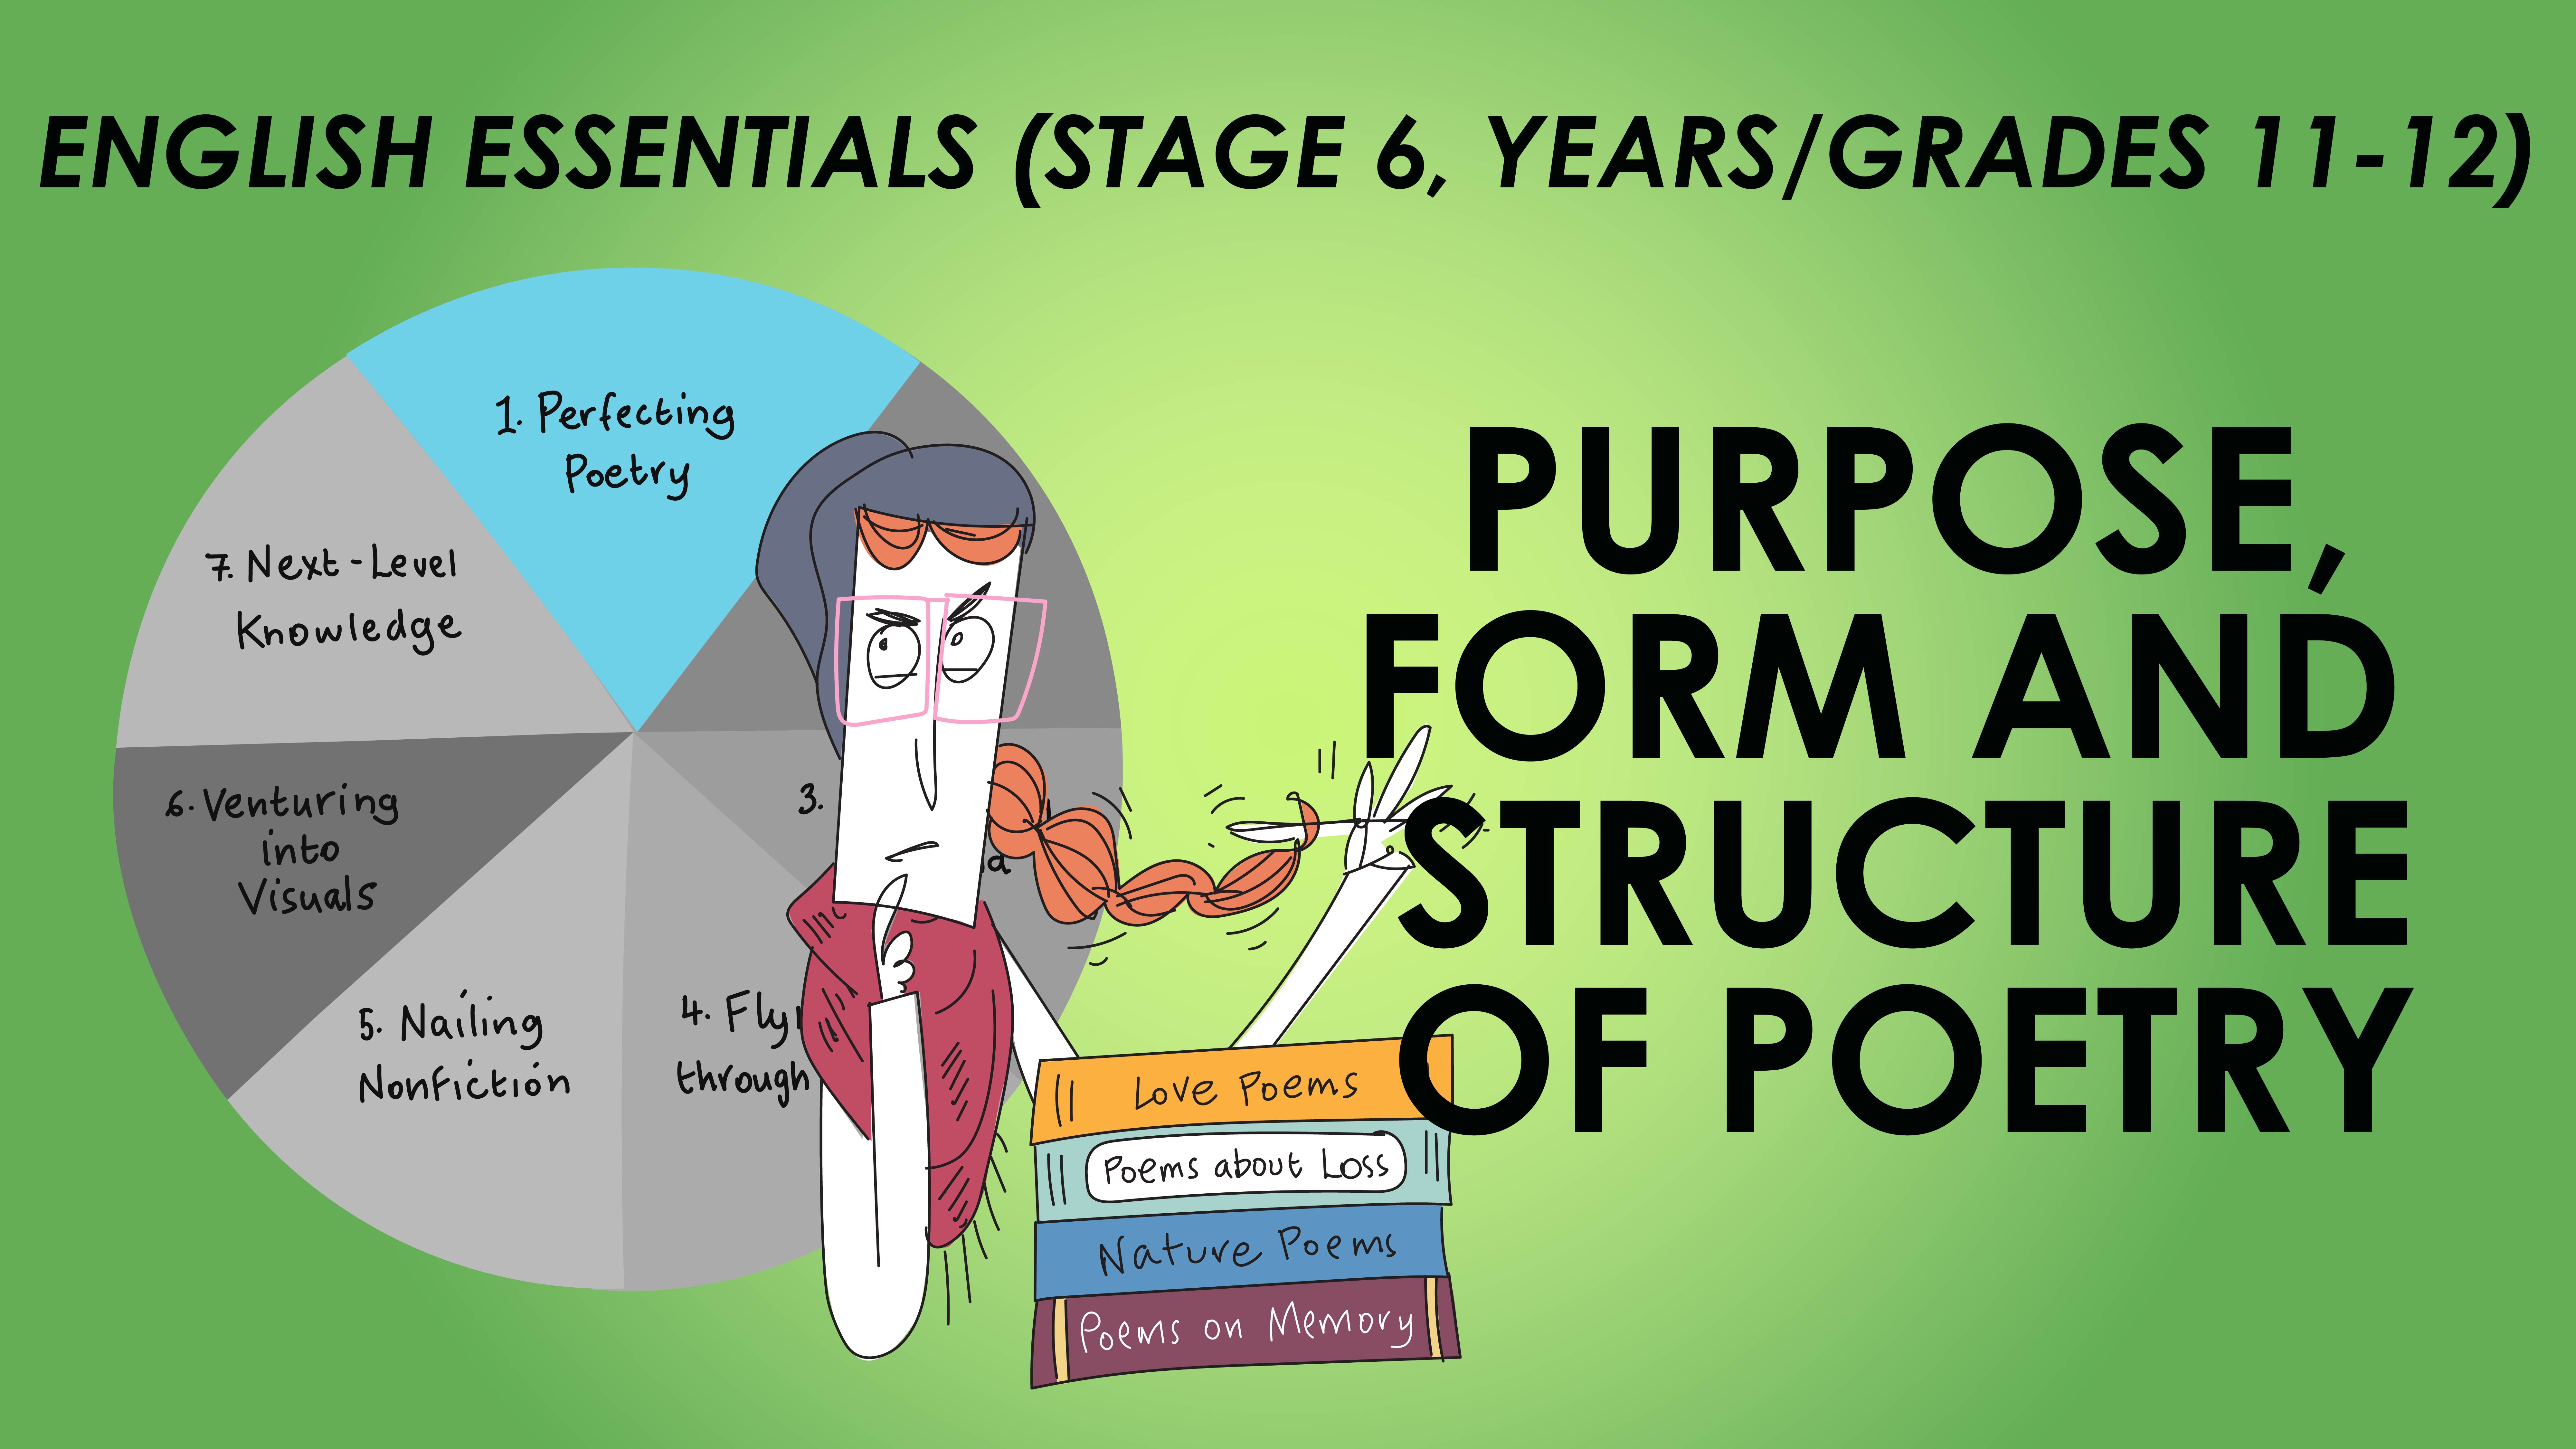 English Essentials - Perfecting Poetry - Purpose, Form and Structure (Stage 6, Years/Grades 11-12)